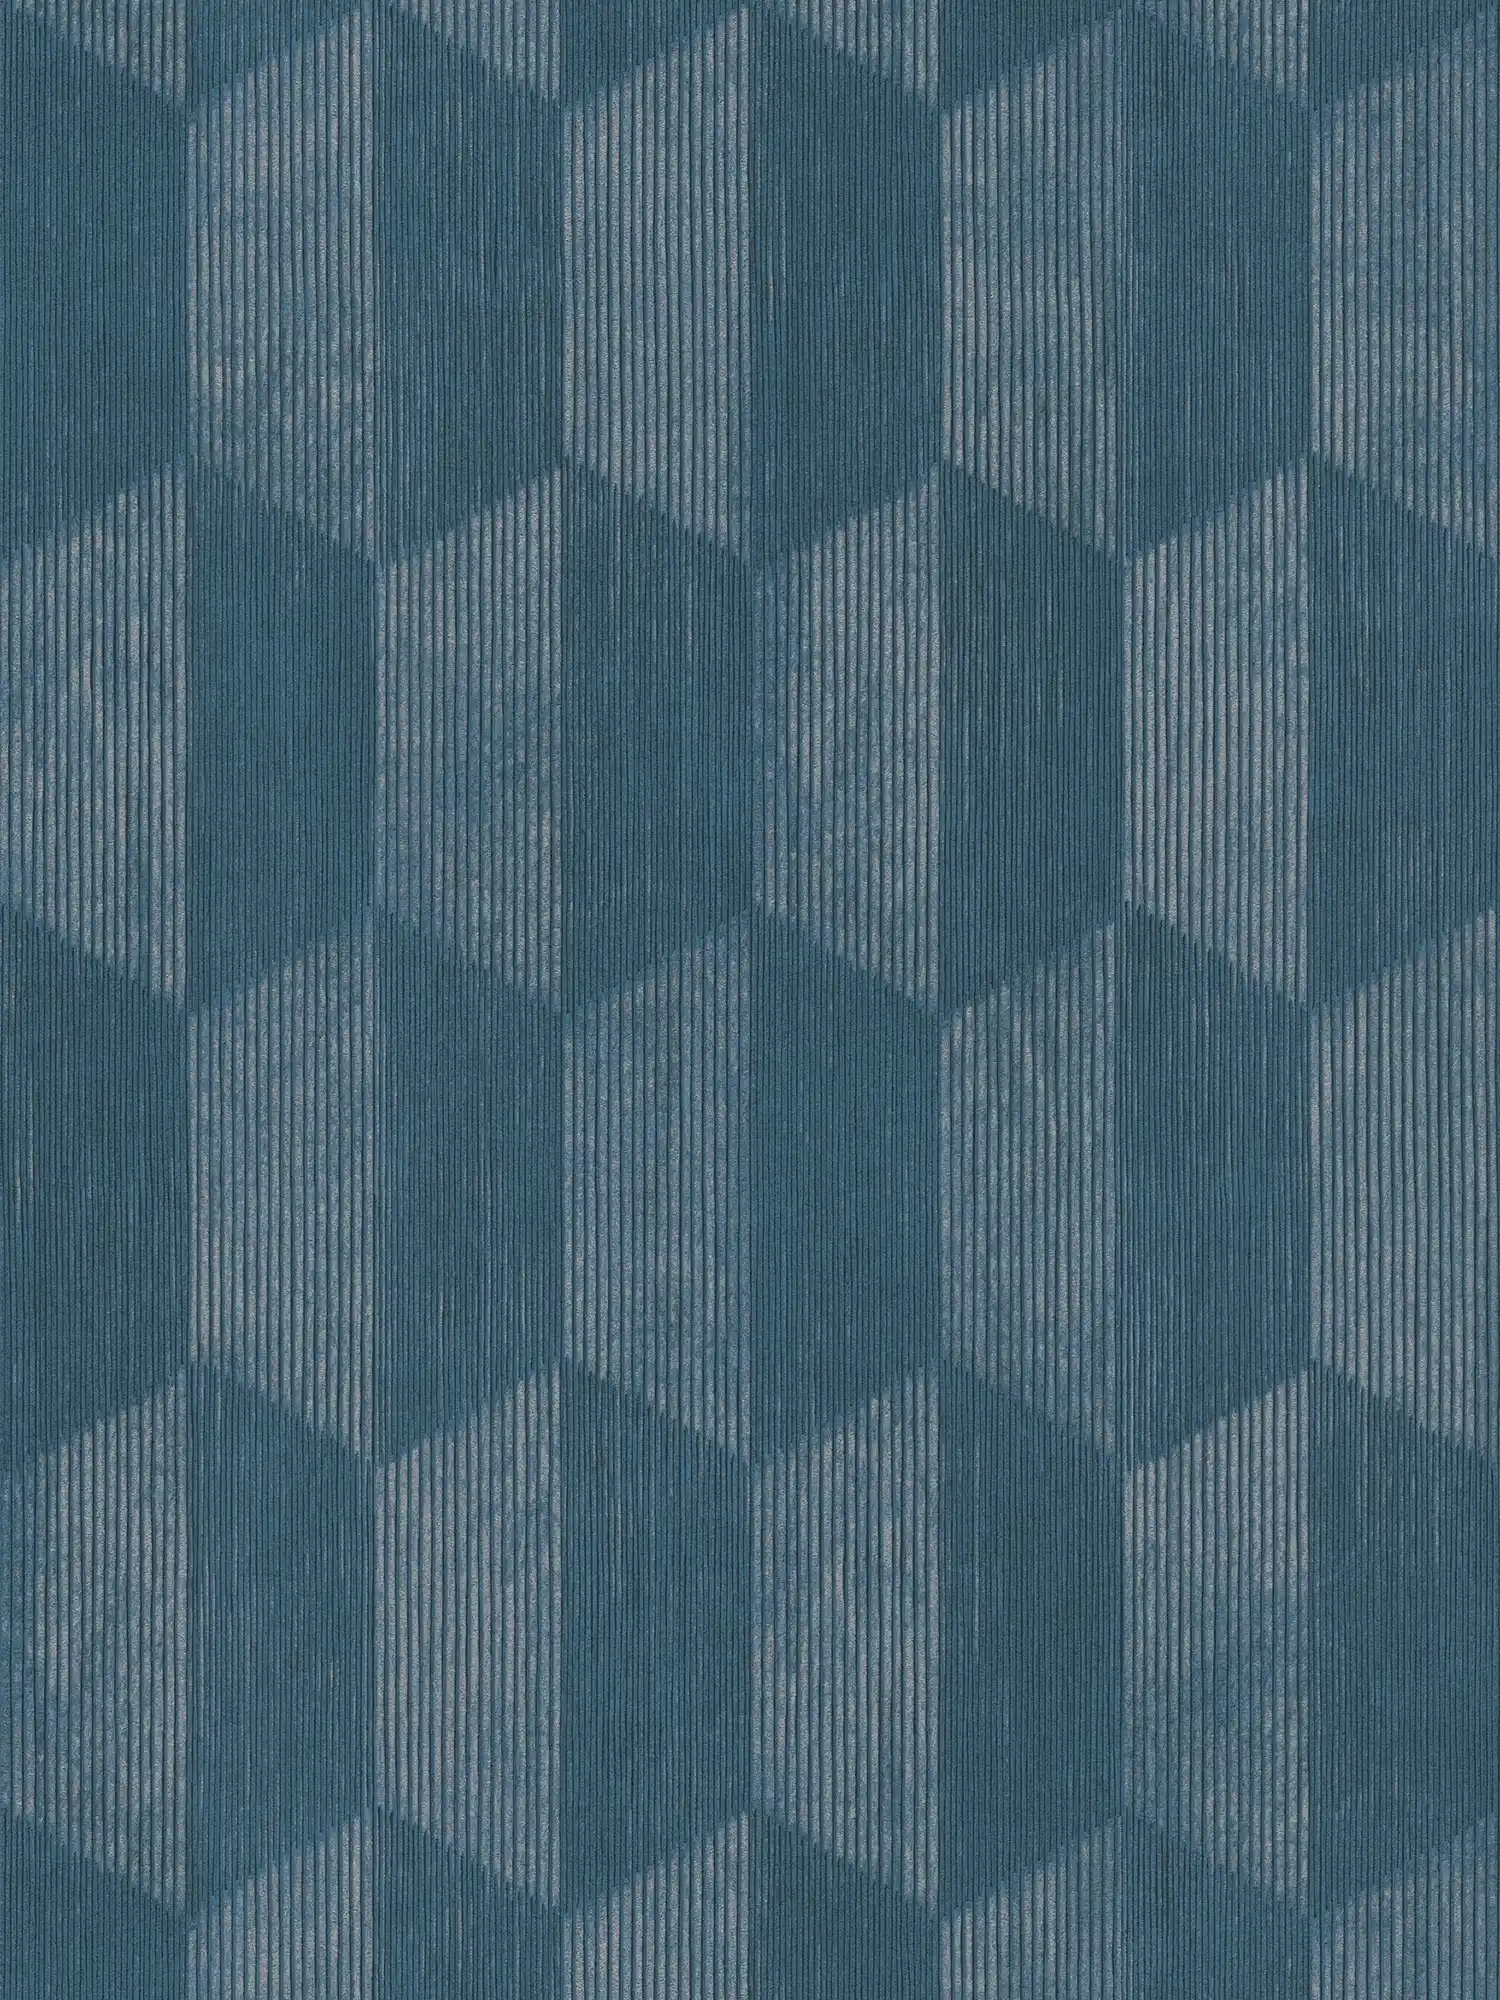 Wallpaper 3D pattern with graphic facets design - blue
